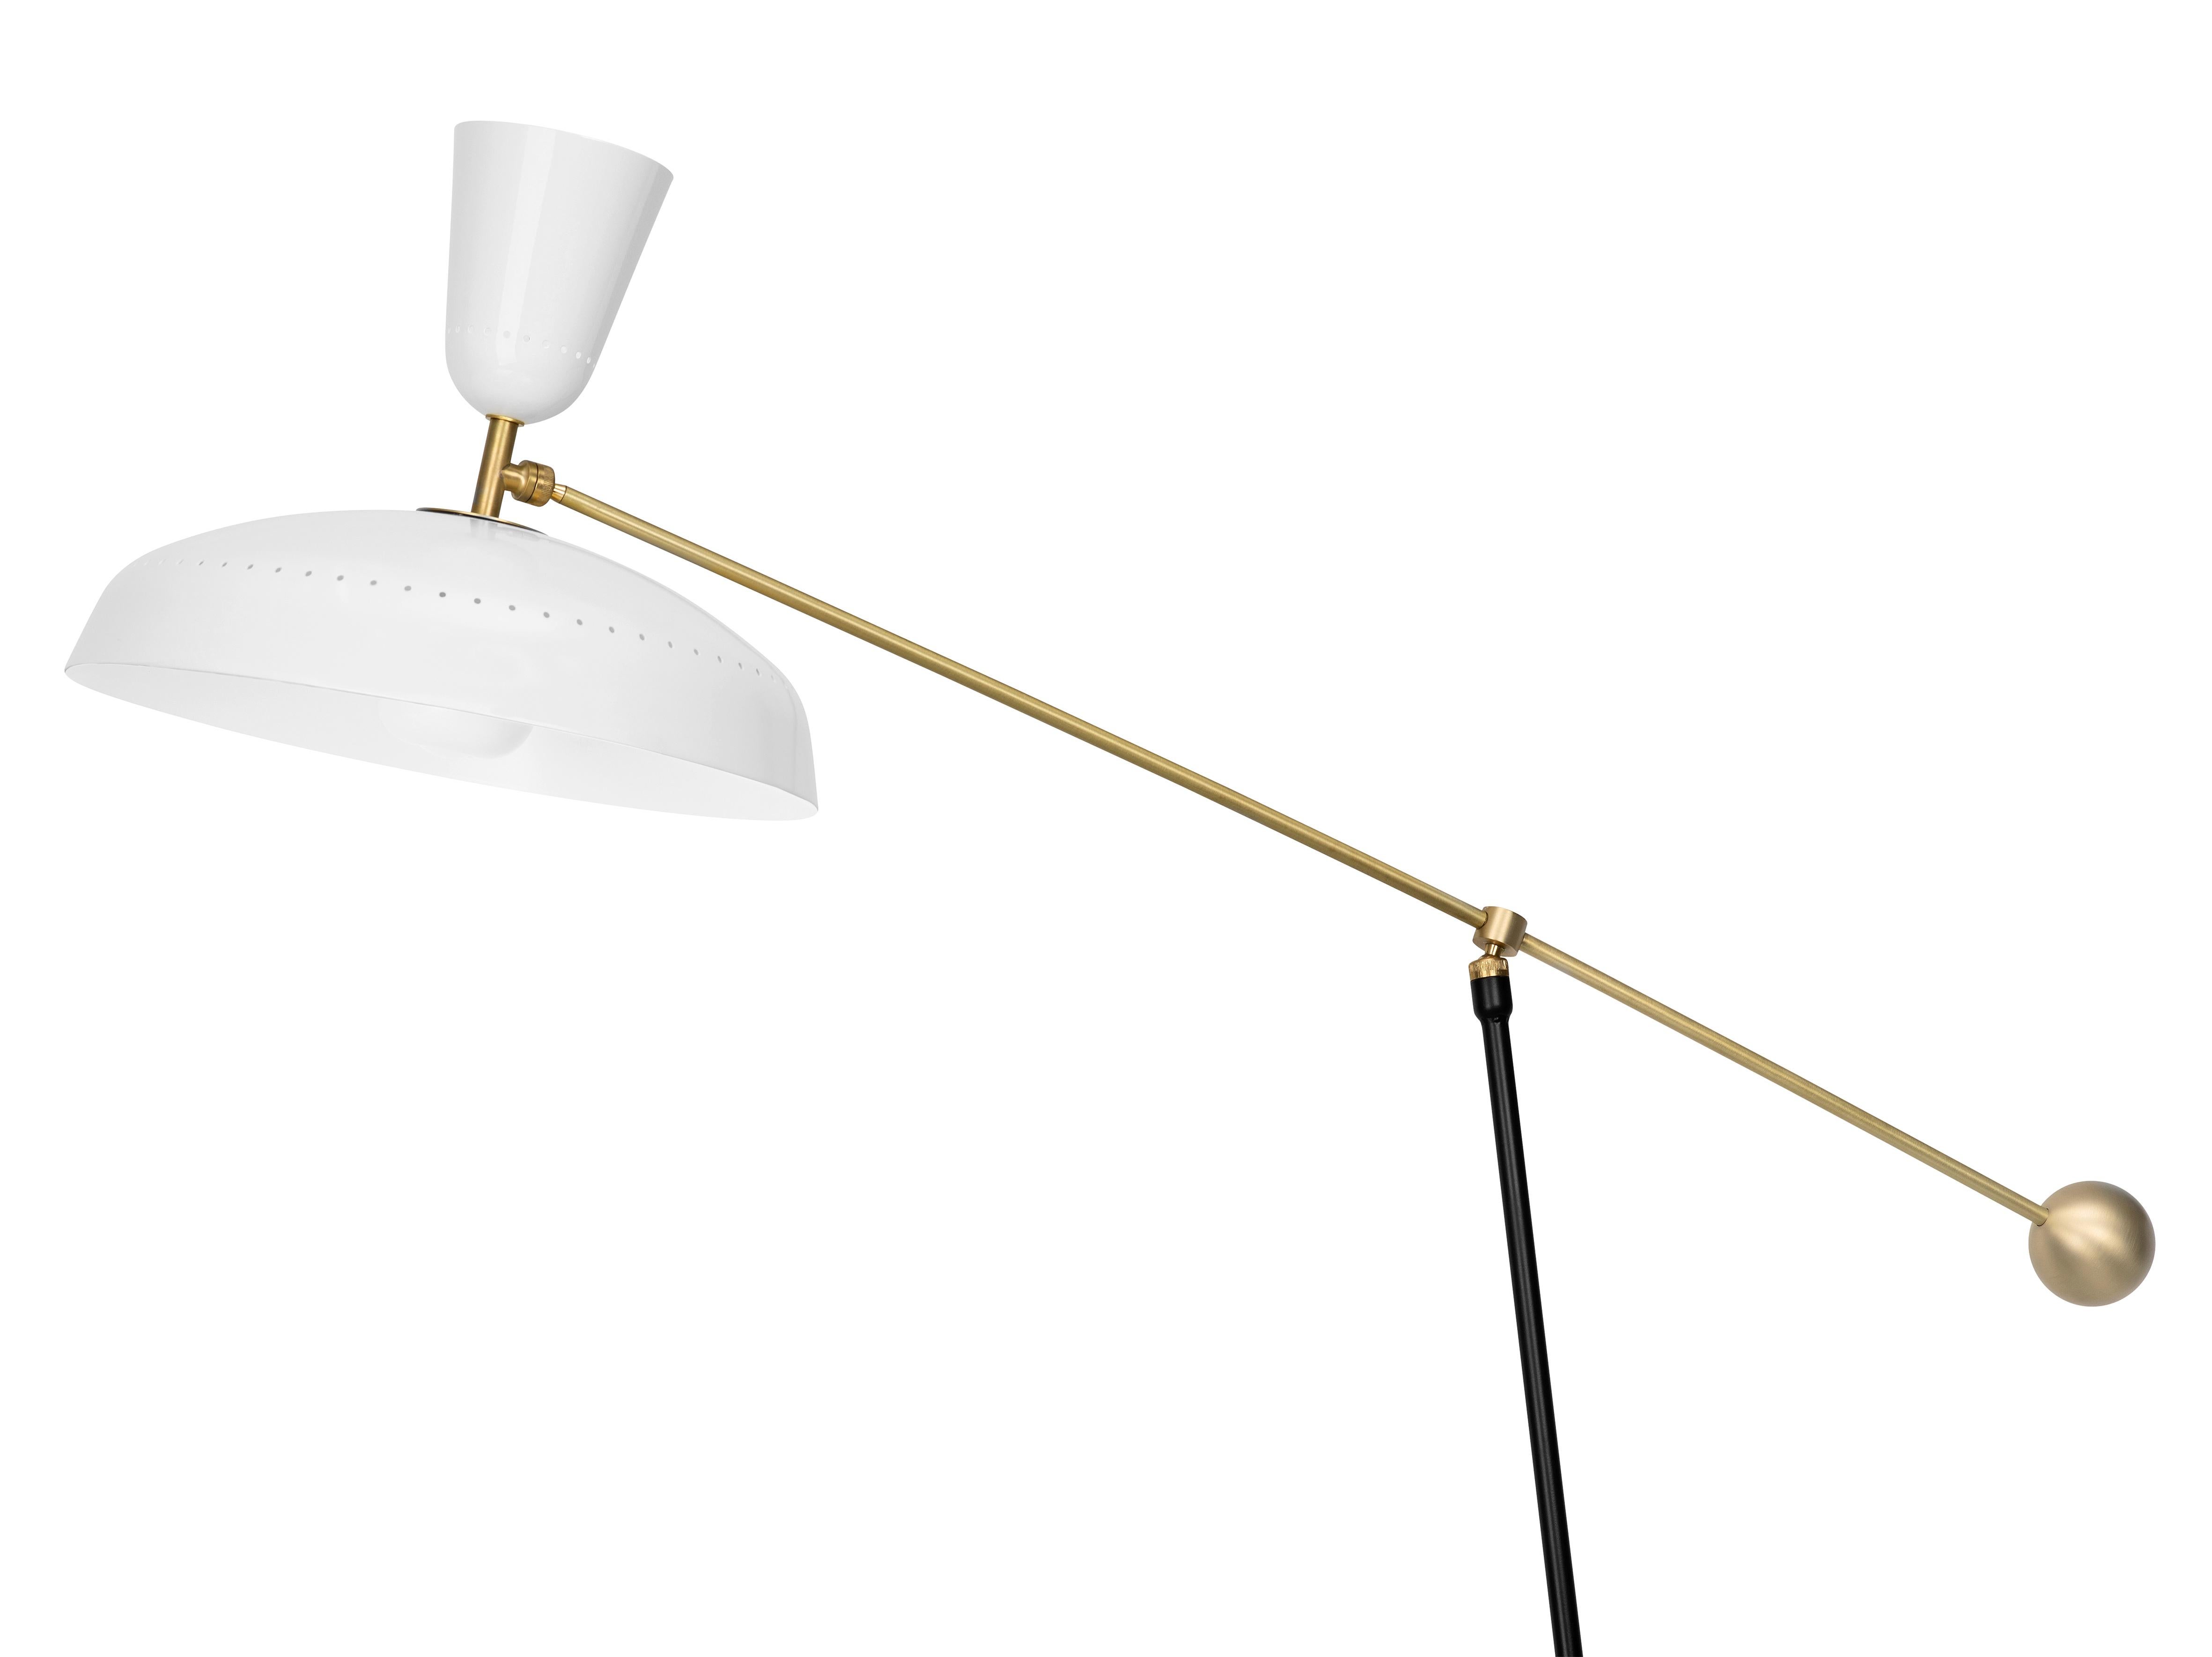 Large Pierre Guariche 'G1' Floor Lamp for Sammode Studio in White In New Condition For Sale In Glendale, CA